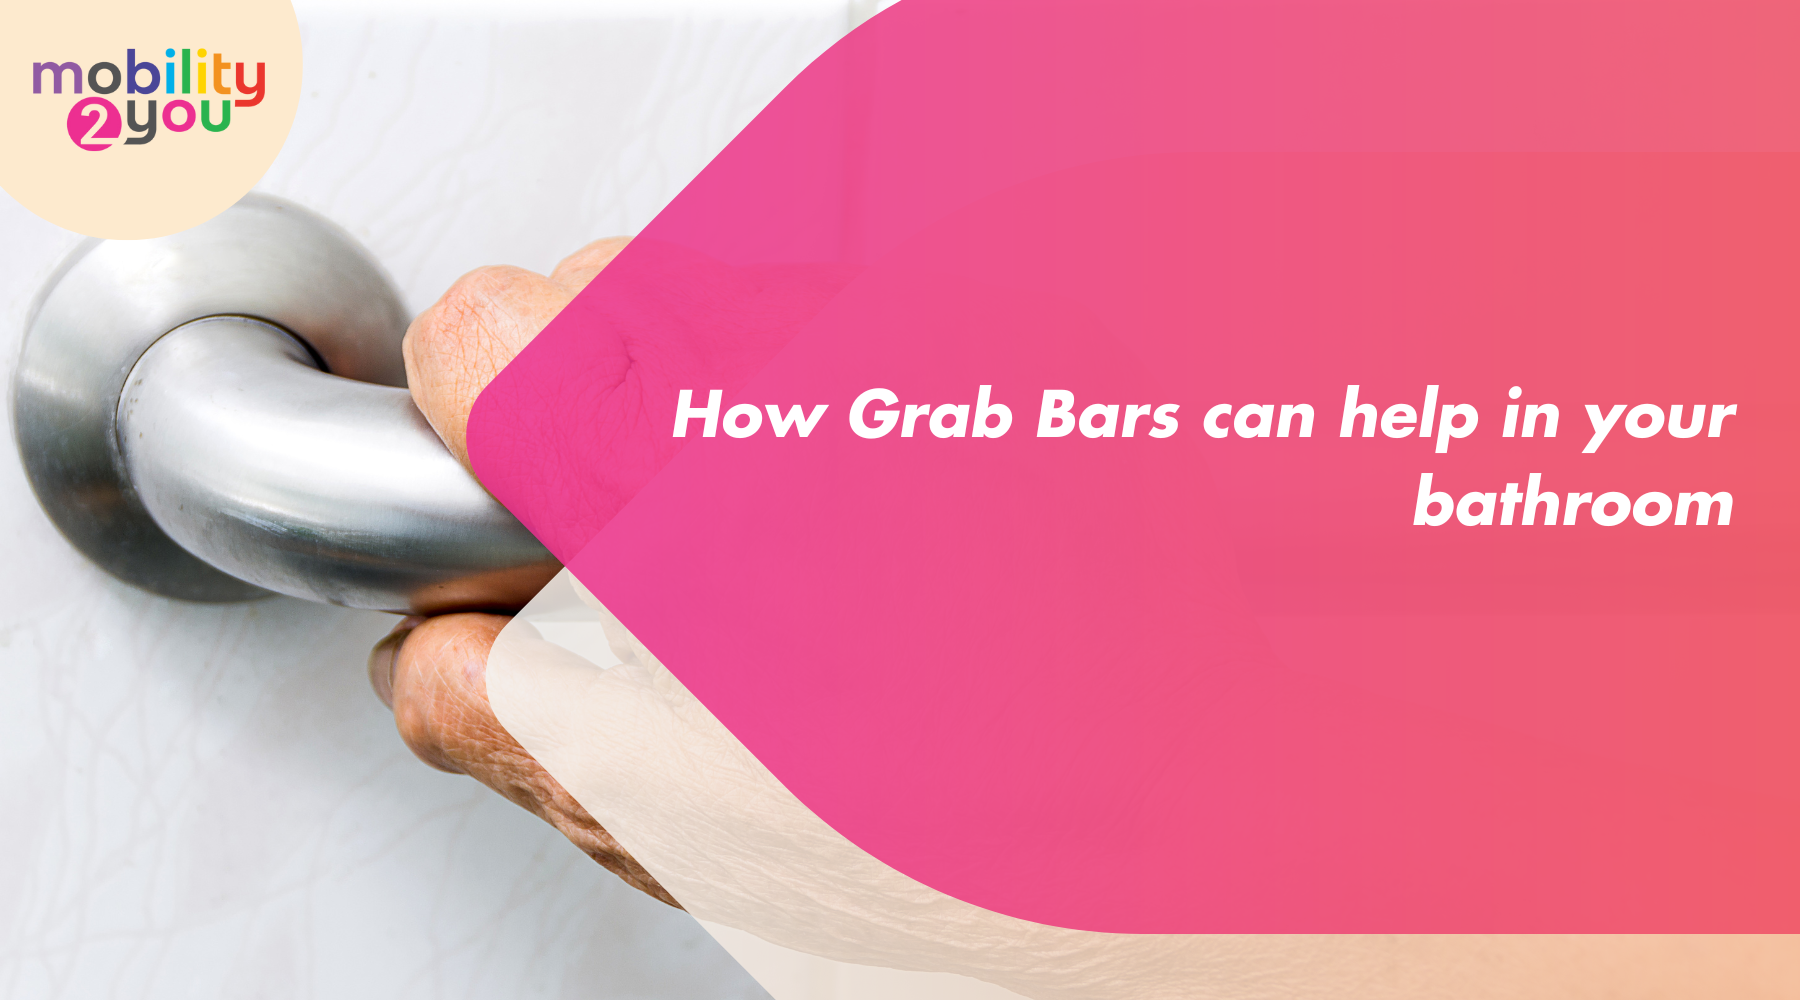 Grab Bars for Bathroom Safety - Mobility 2You